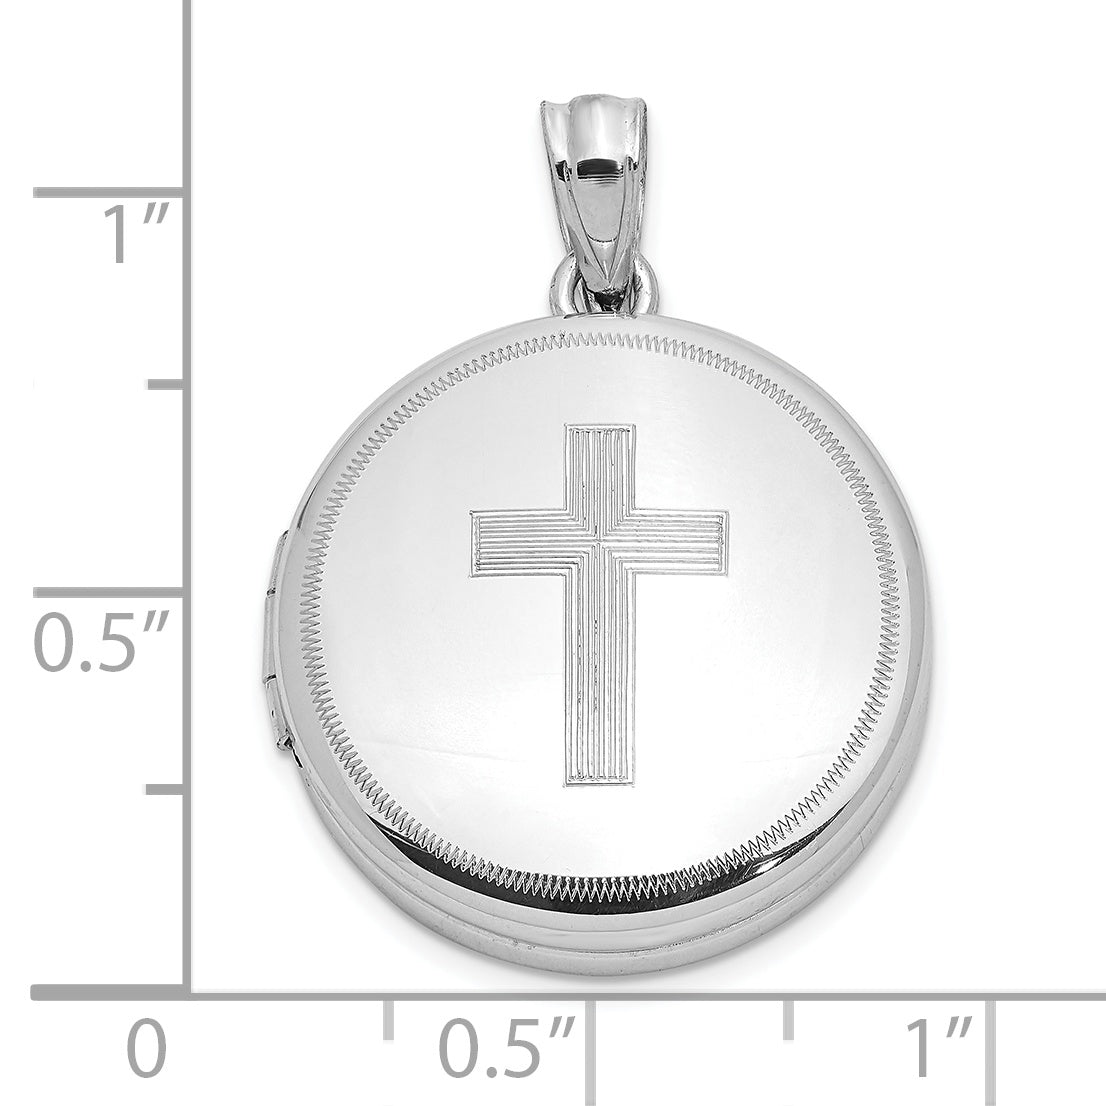 Sterling Silver Rhodium-plated Polished Cross 20mm Round Locket